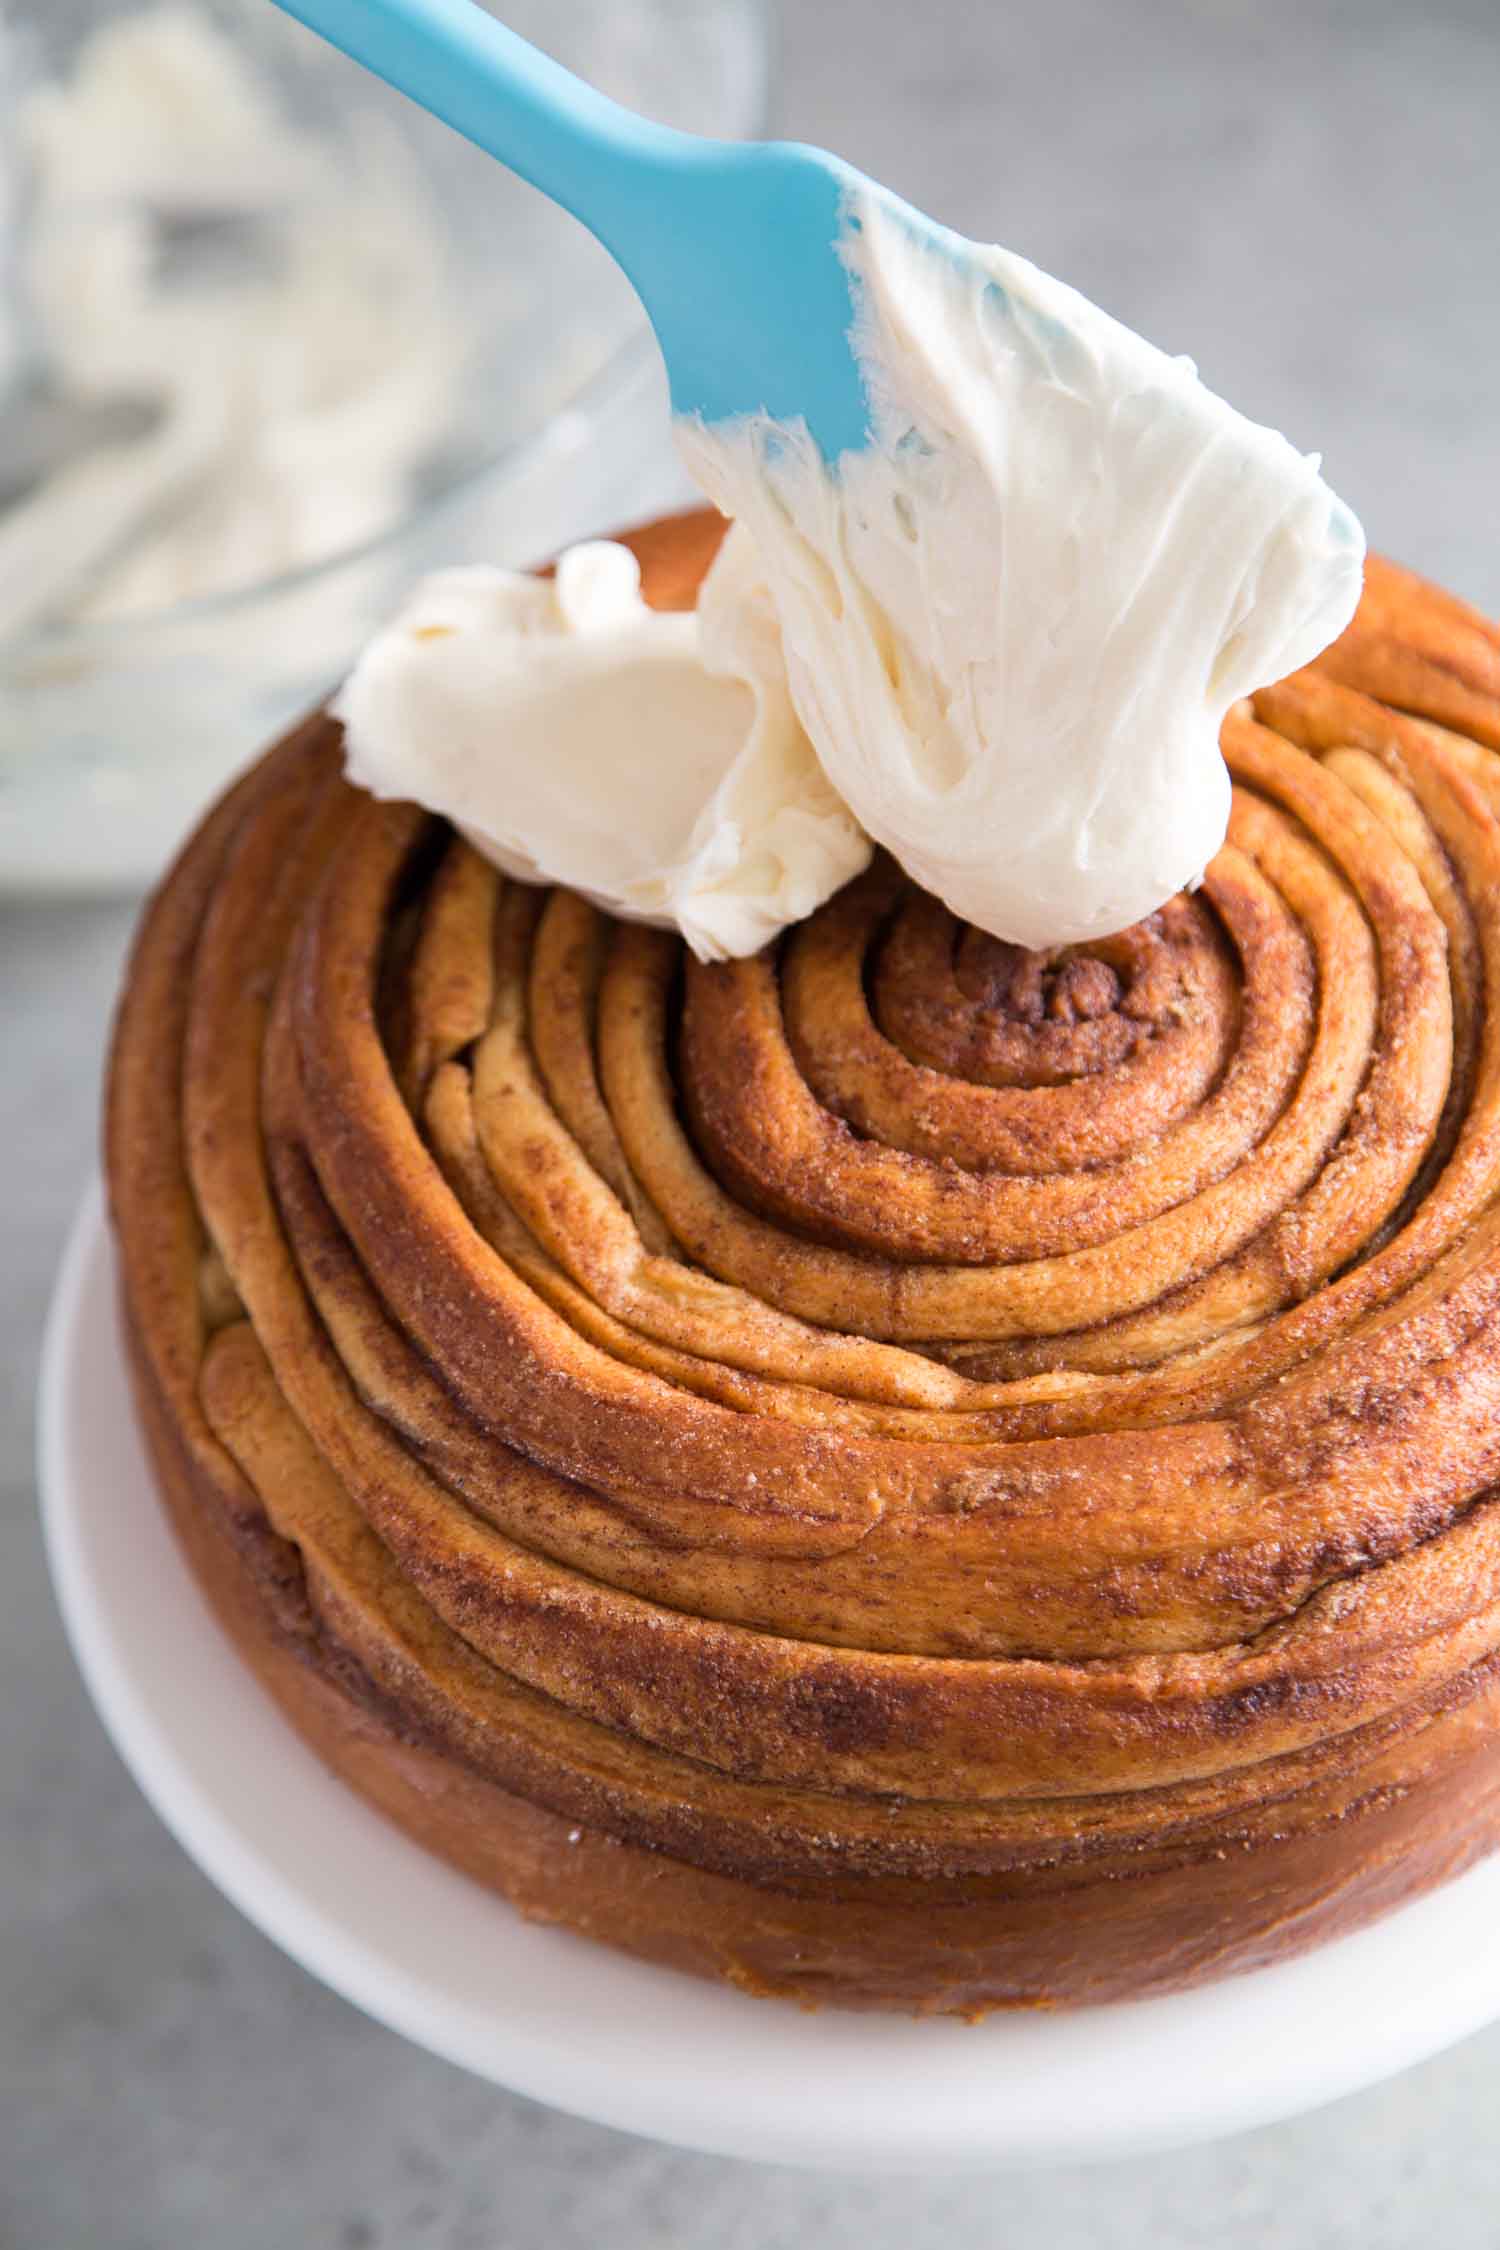 Birthday Cinnamon Roll Cake with Cream Cheese Frosting